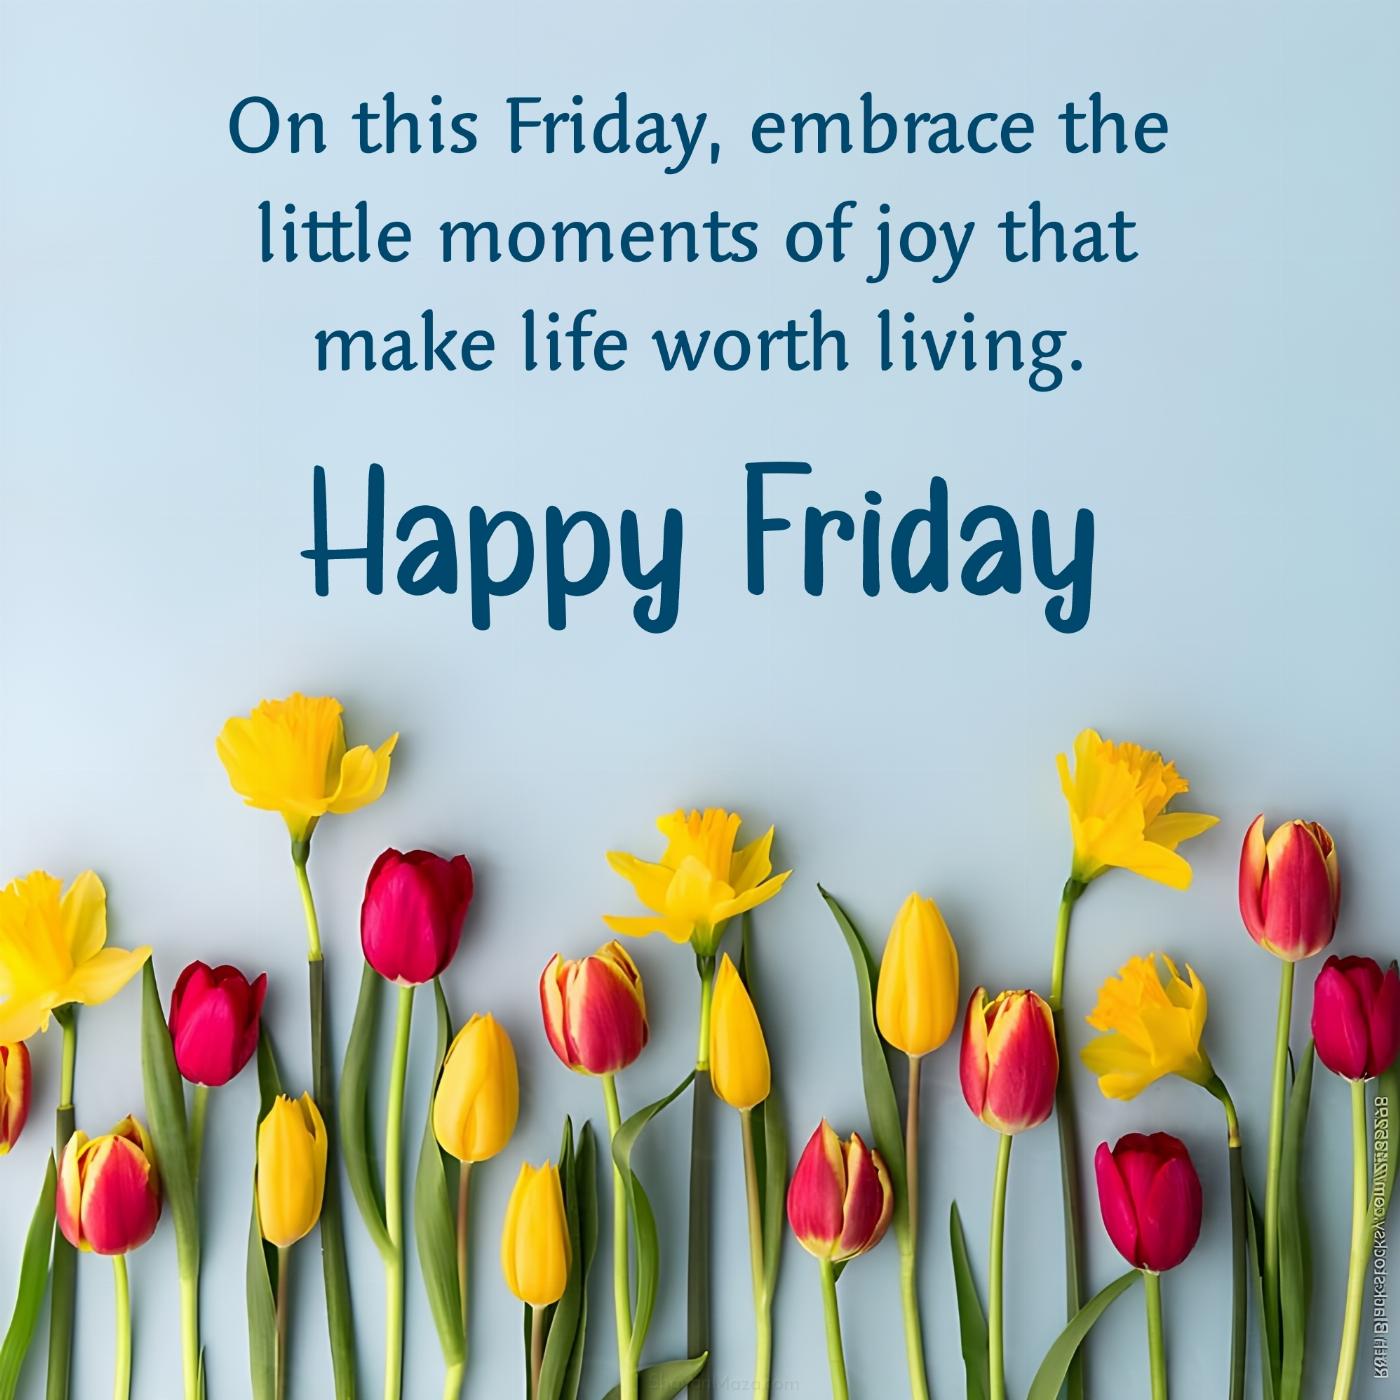 On this Friday embrace the little moments of joy